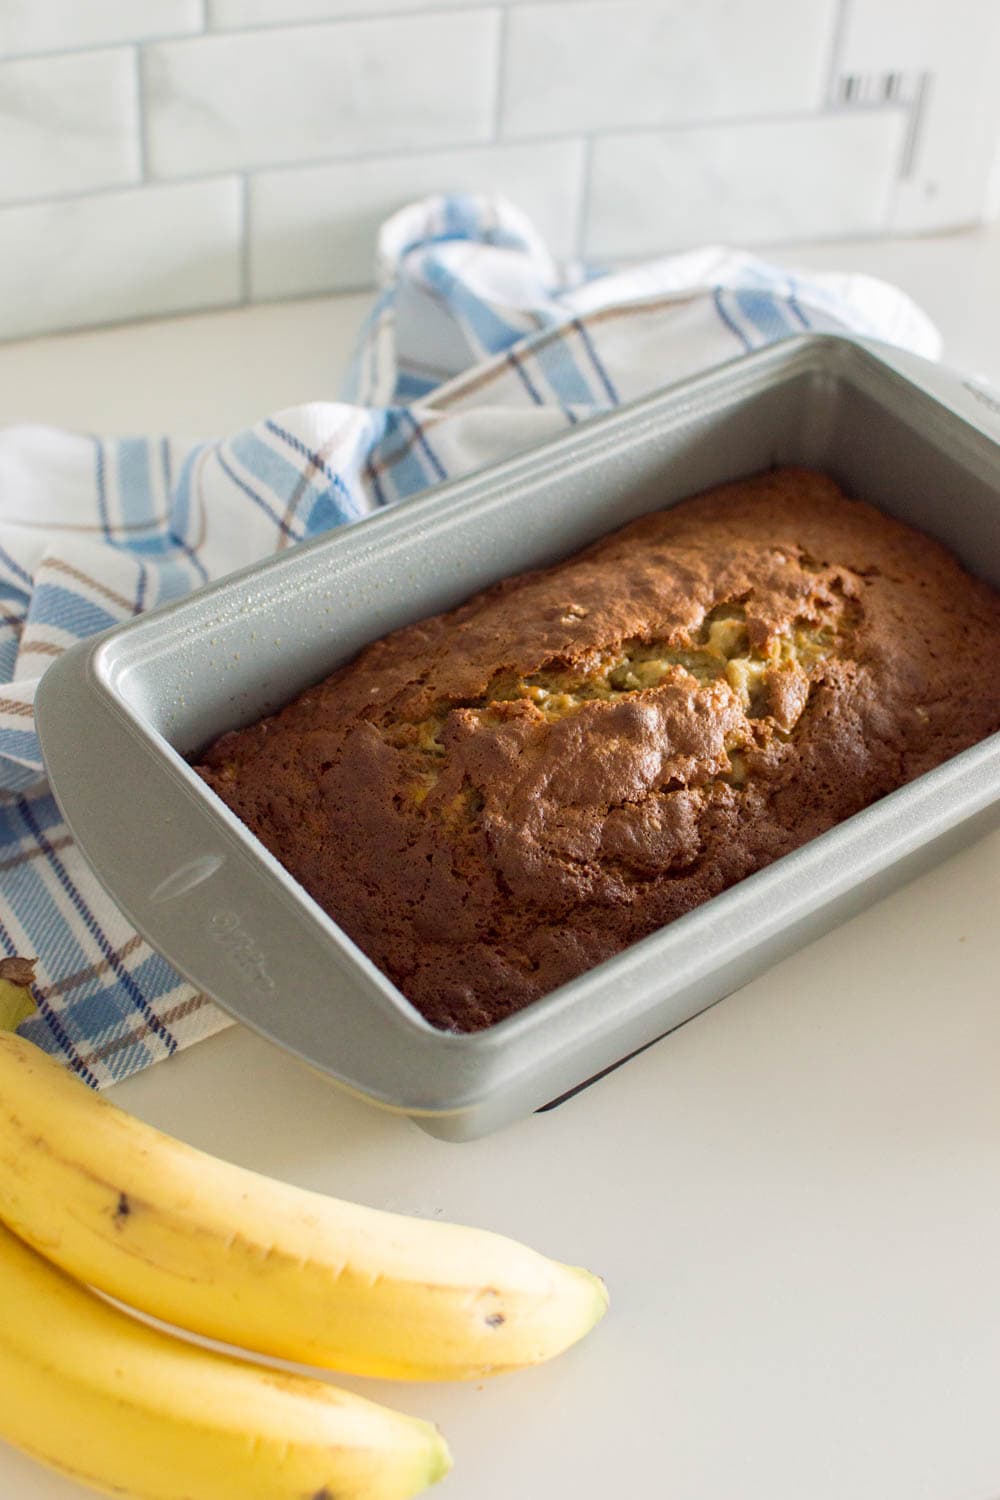 Homemade banana bread in a loaf pan